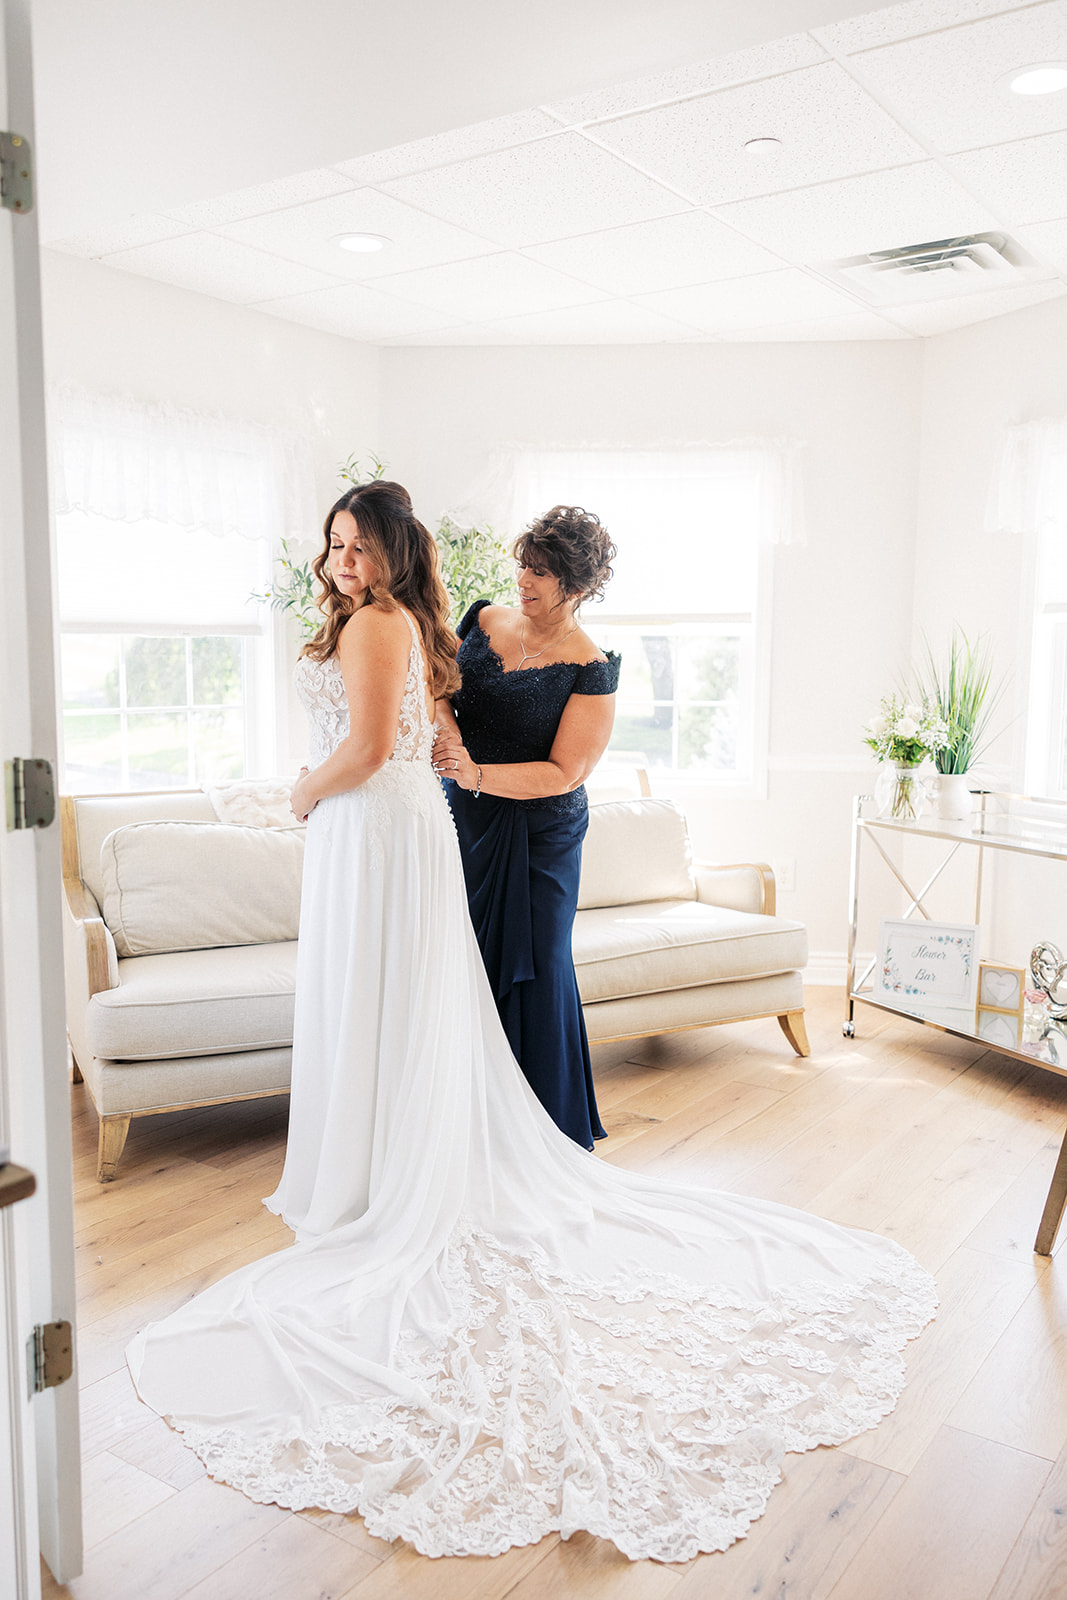 A mother in a dark dress helps her daughter put on her wedding dress